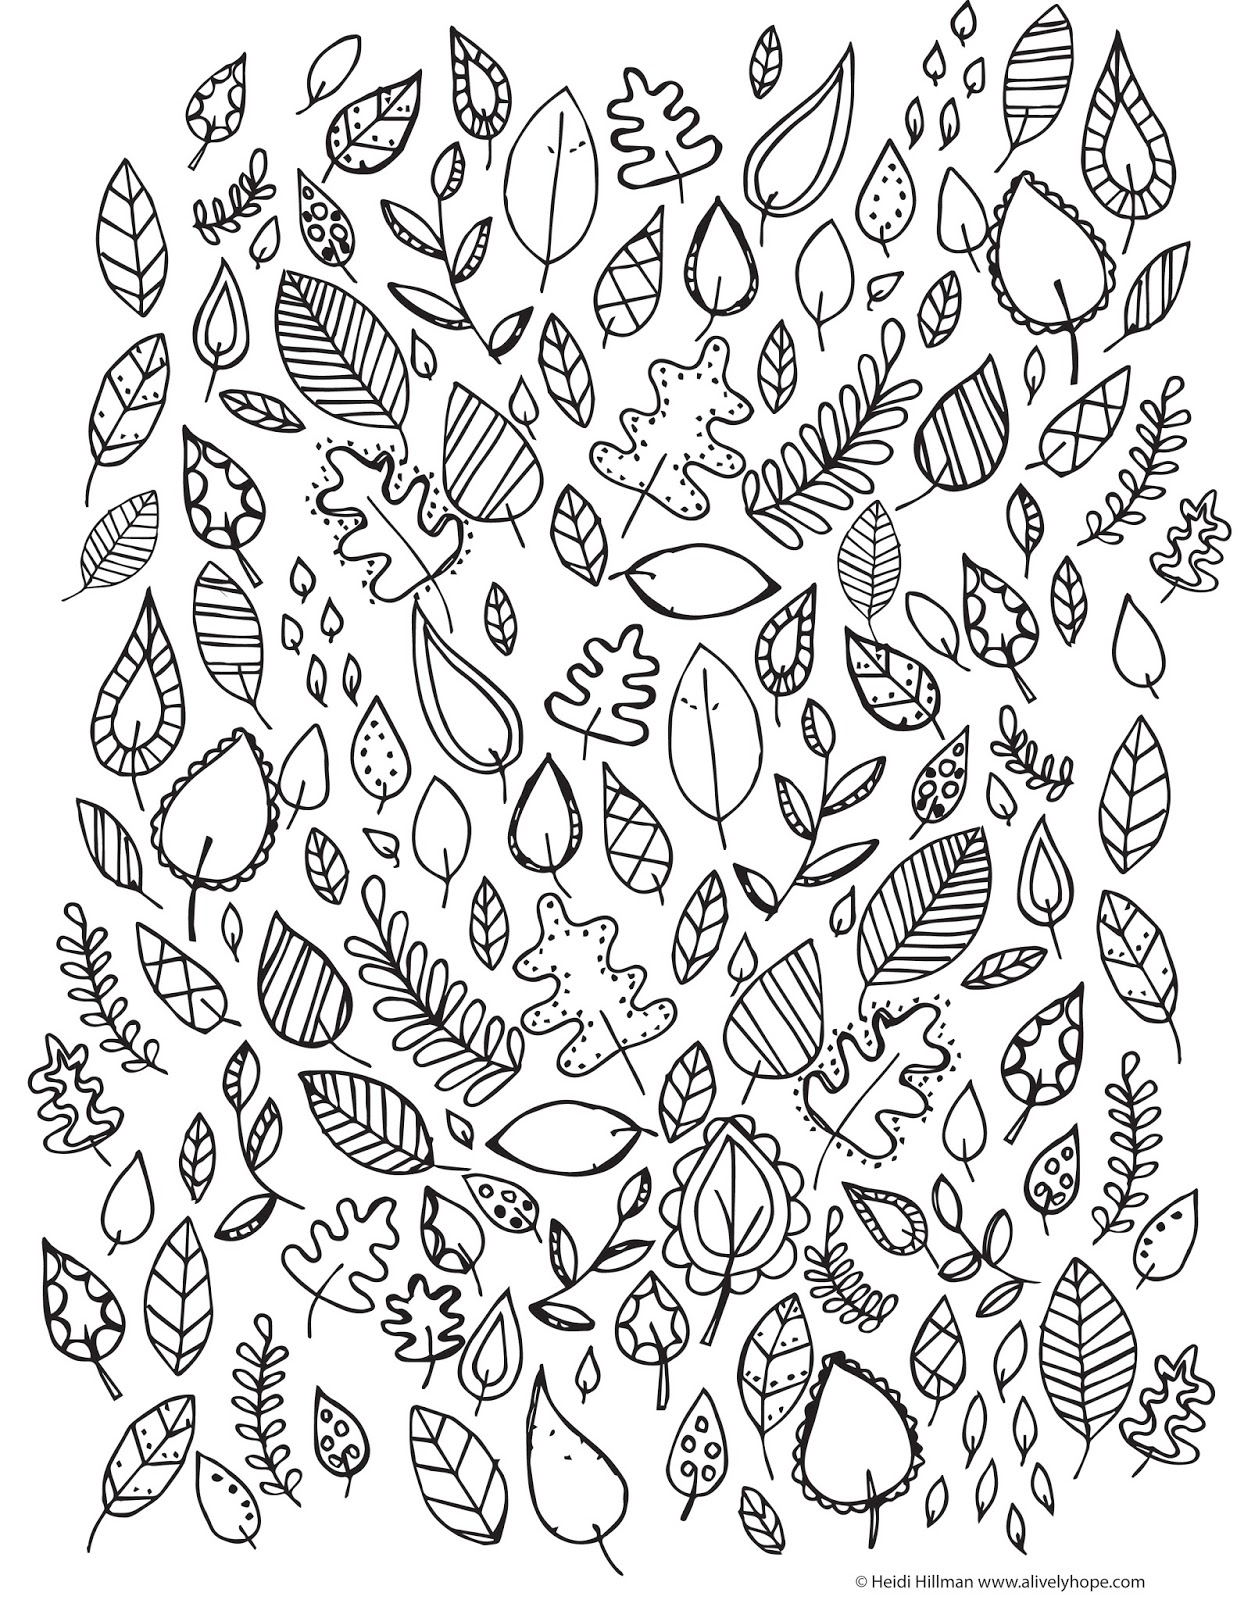 A Lively Hope: Free Gratitude Coloring Page